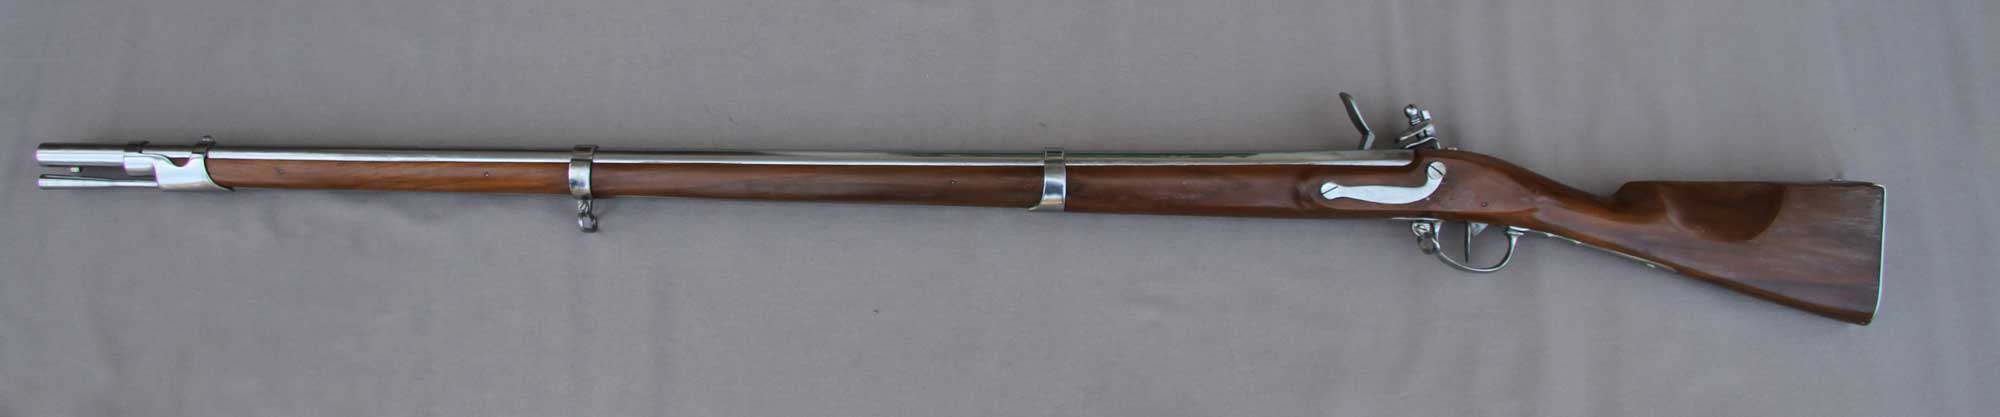 French, 1777 Charleville (AN IX) musket - Click Image to Close